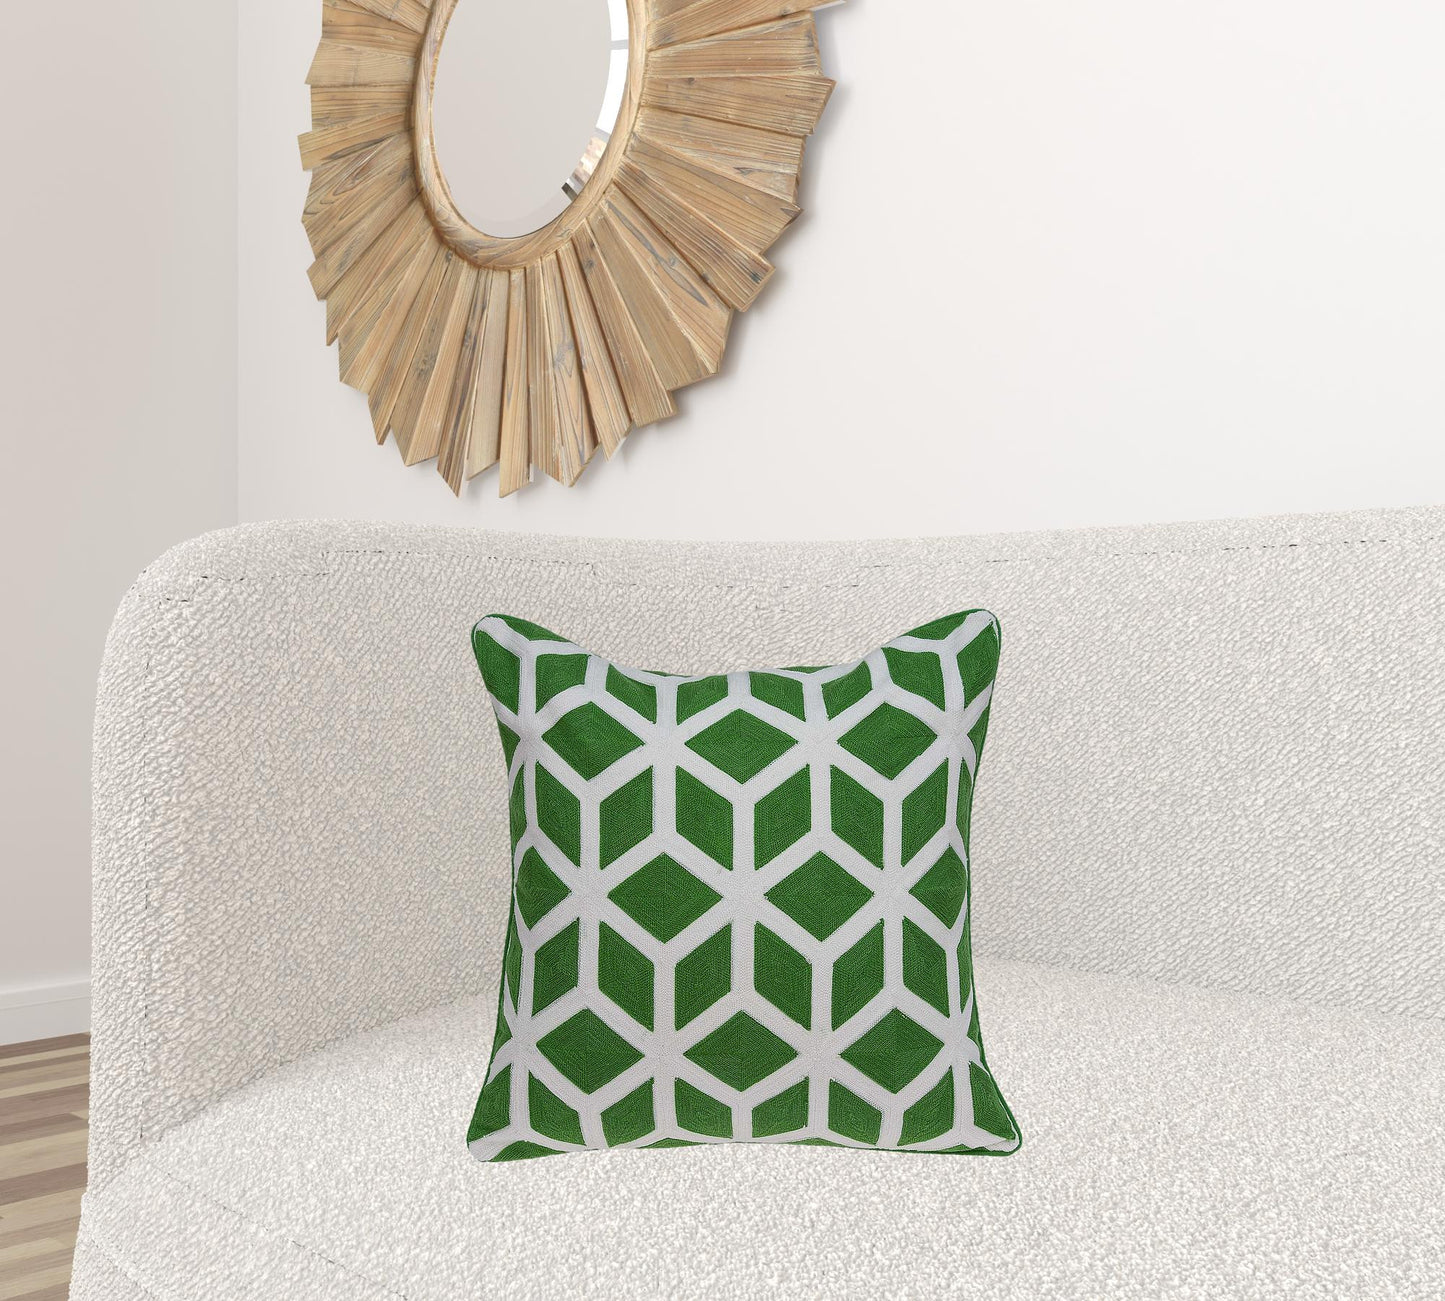 20" X 7" X 20" Transitional Green And White Pillow Cover With Poly Insert